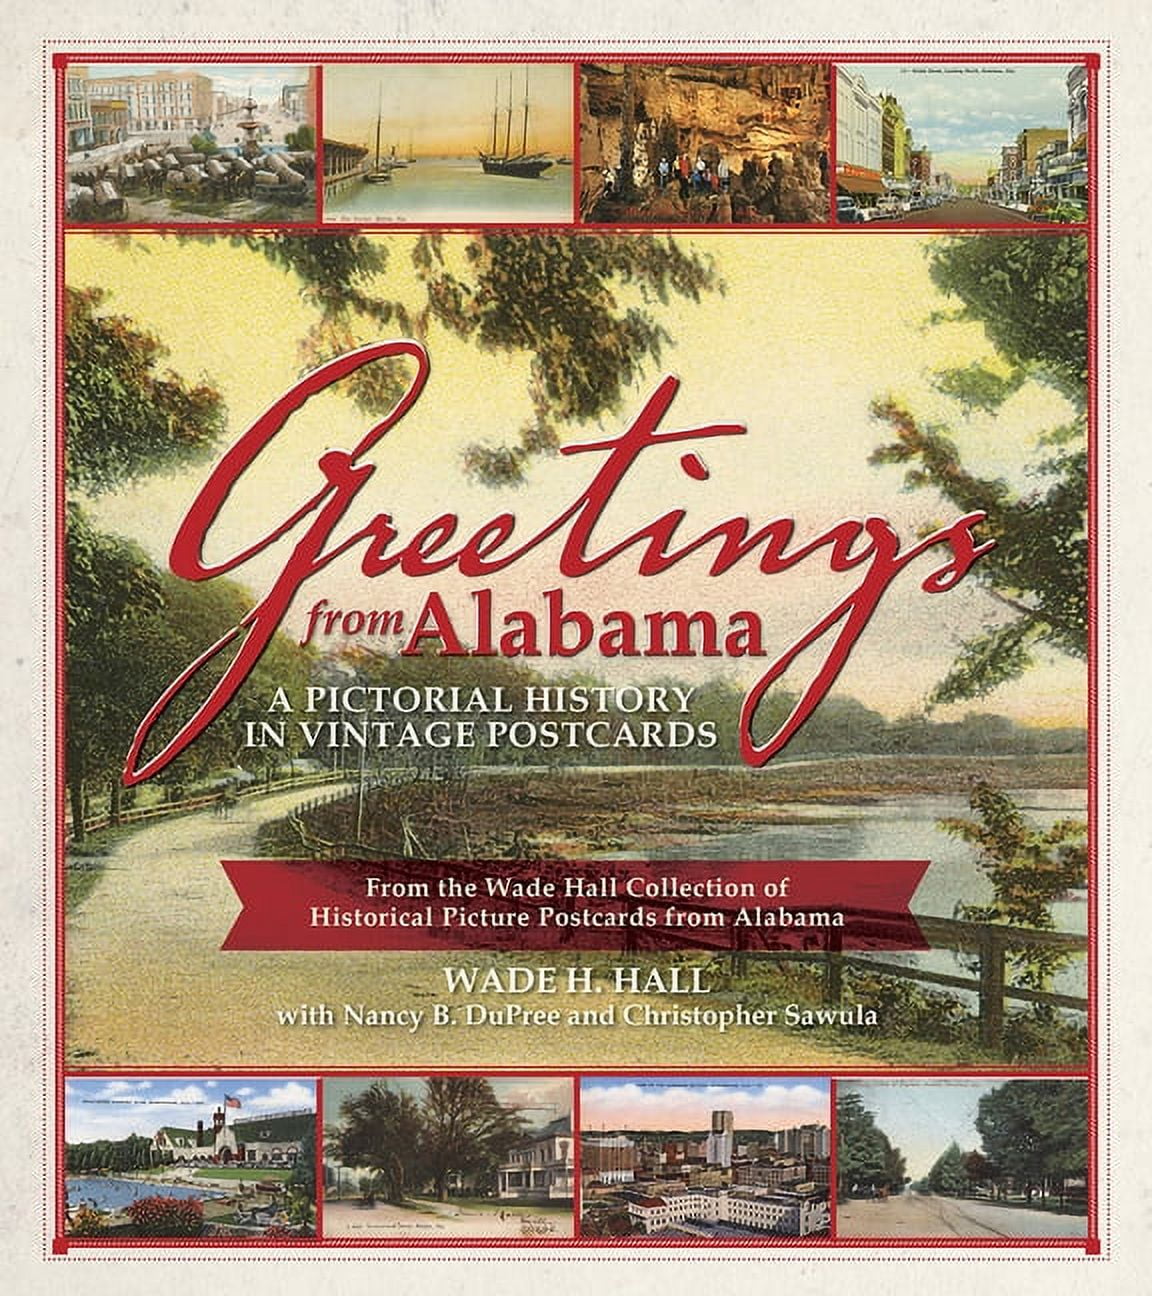 Greetings from Alabama: A Pictorial History in Vintage Postcards : from the Wade Hall Collection of Historical Picture Postcards from Alabama [Book]